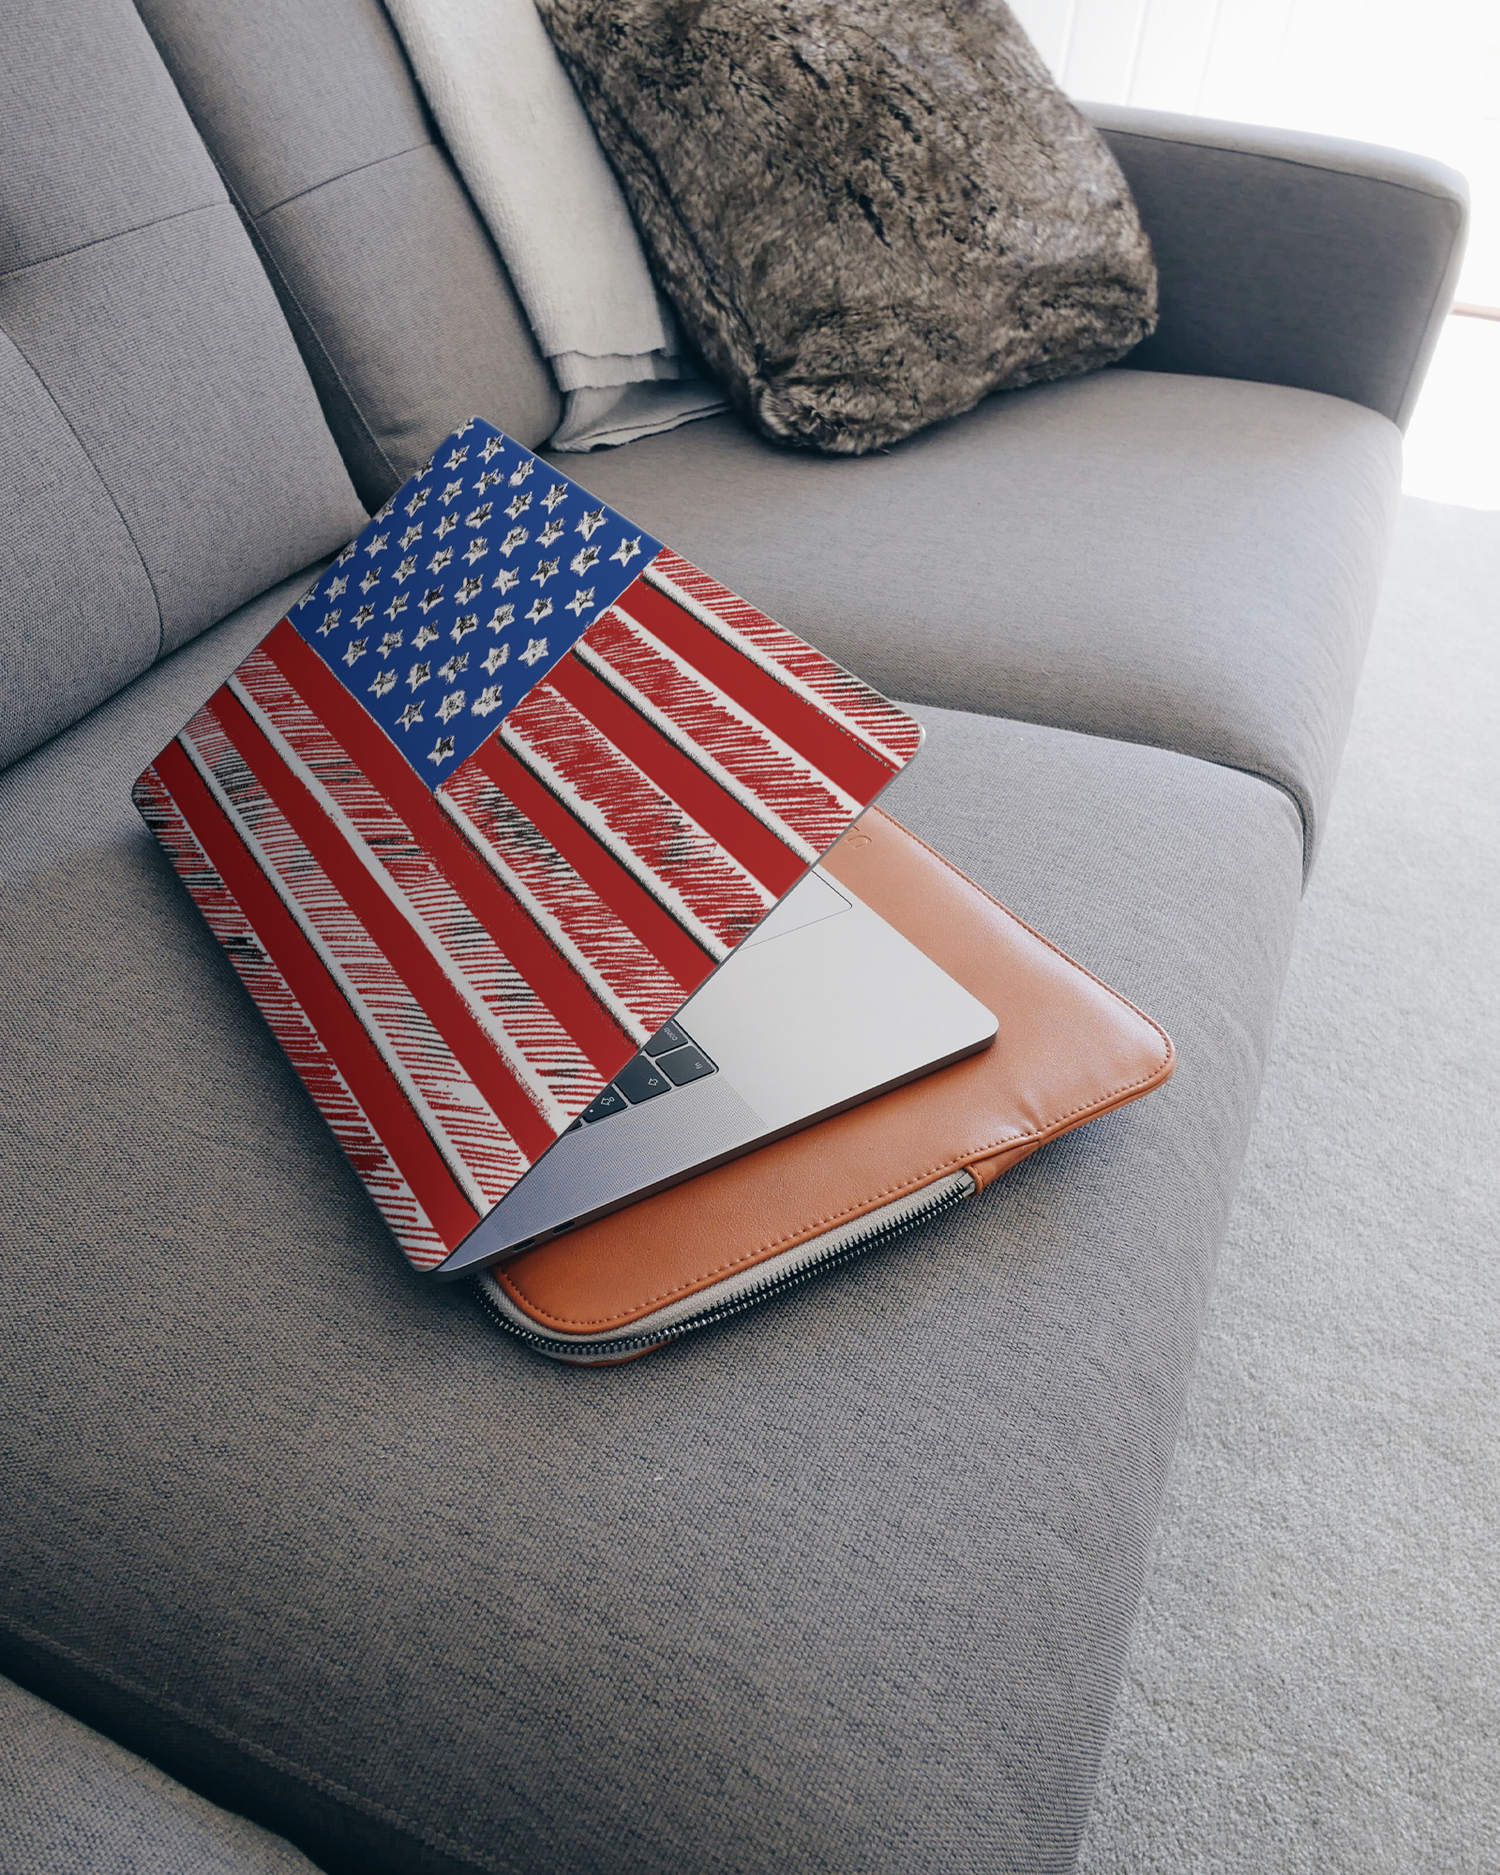 American Flag Color Laptop Skin for 15 inch Apple MacBooks on a couch